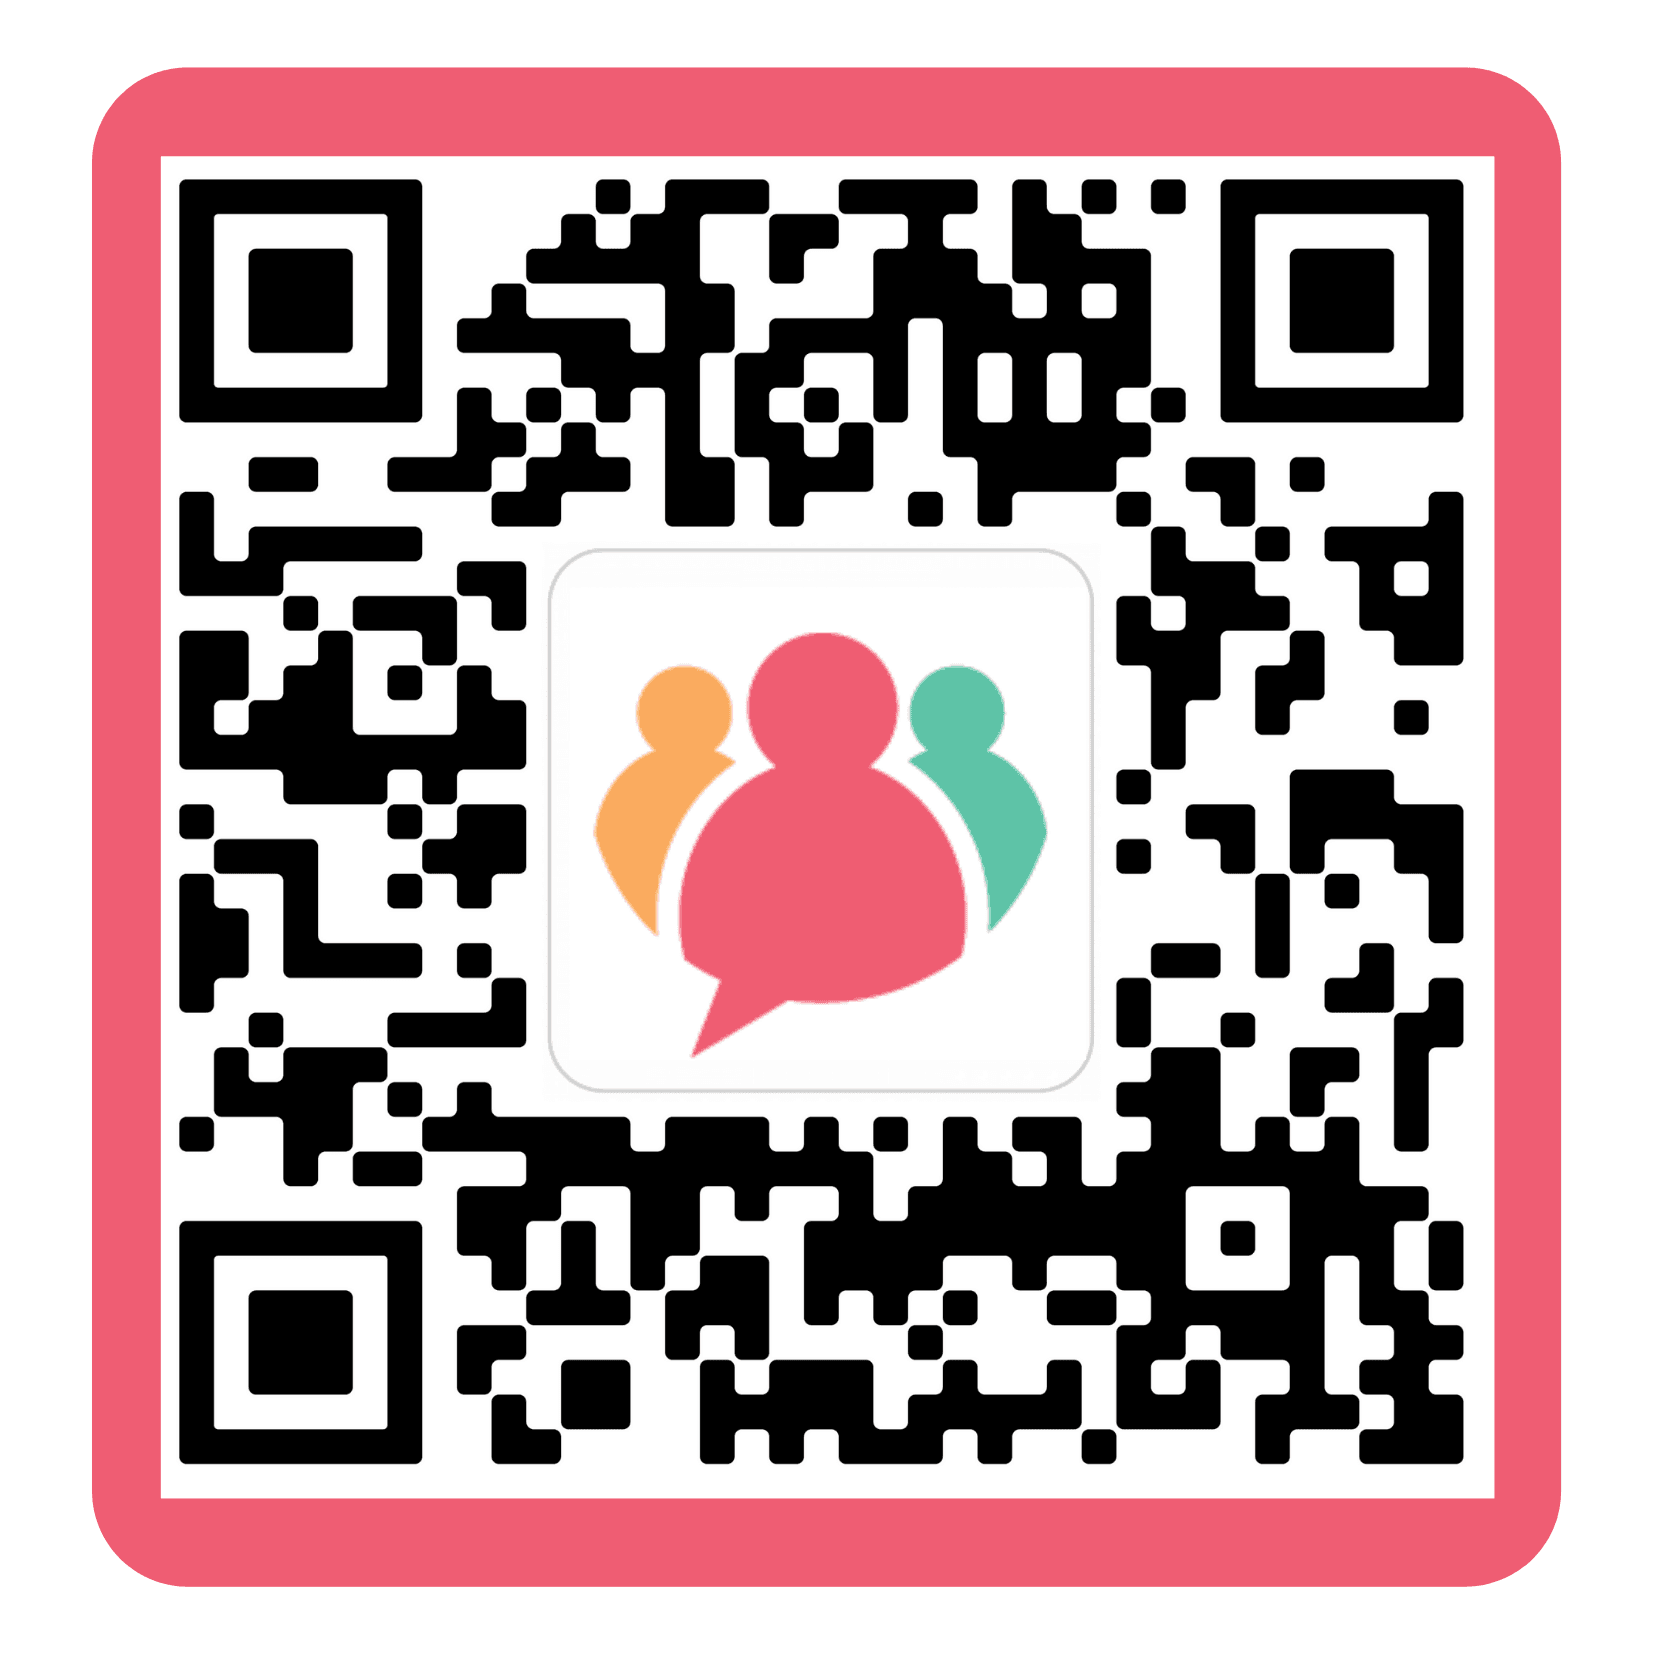 Care-Friends-download-QR-code.png